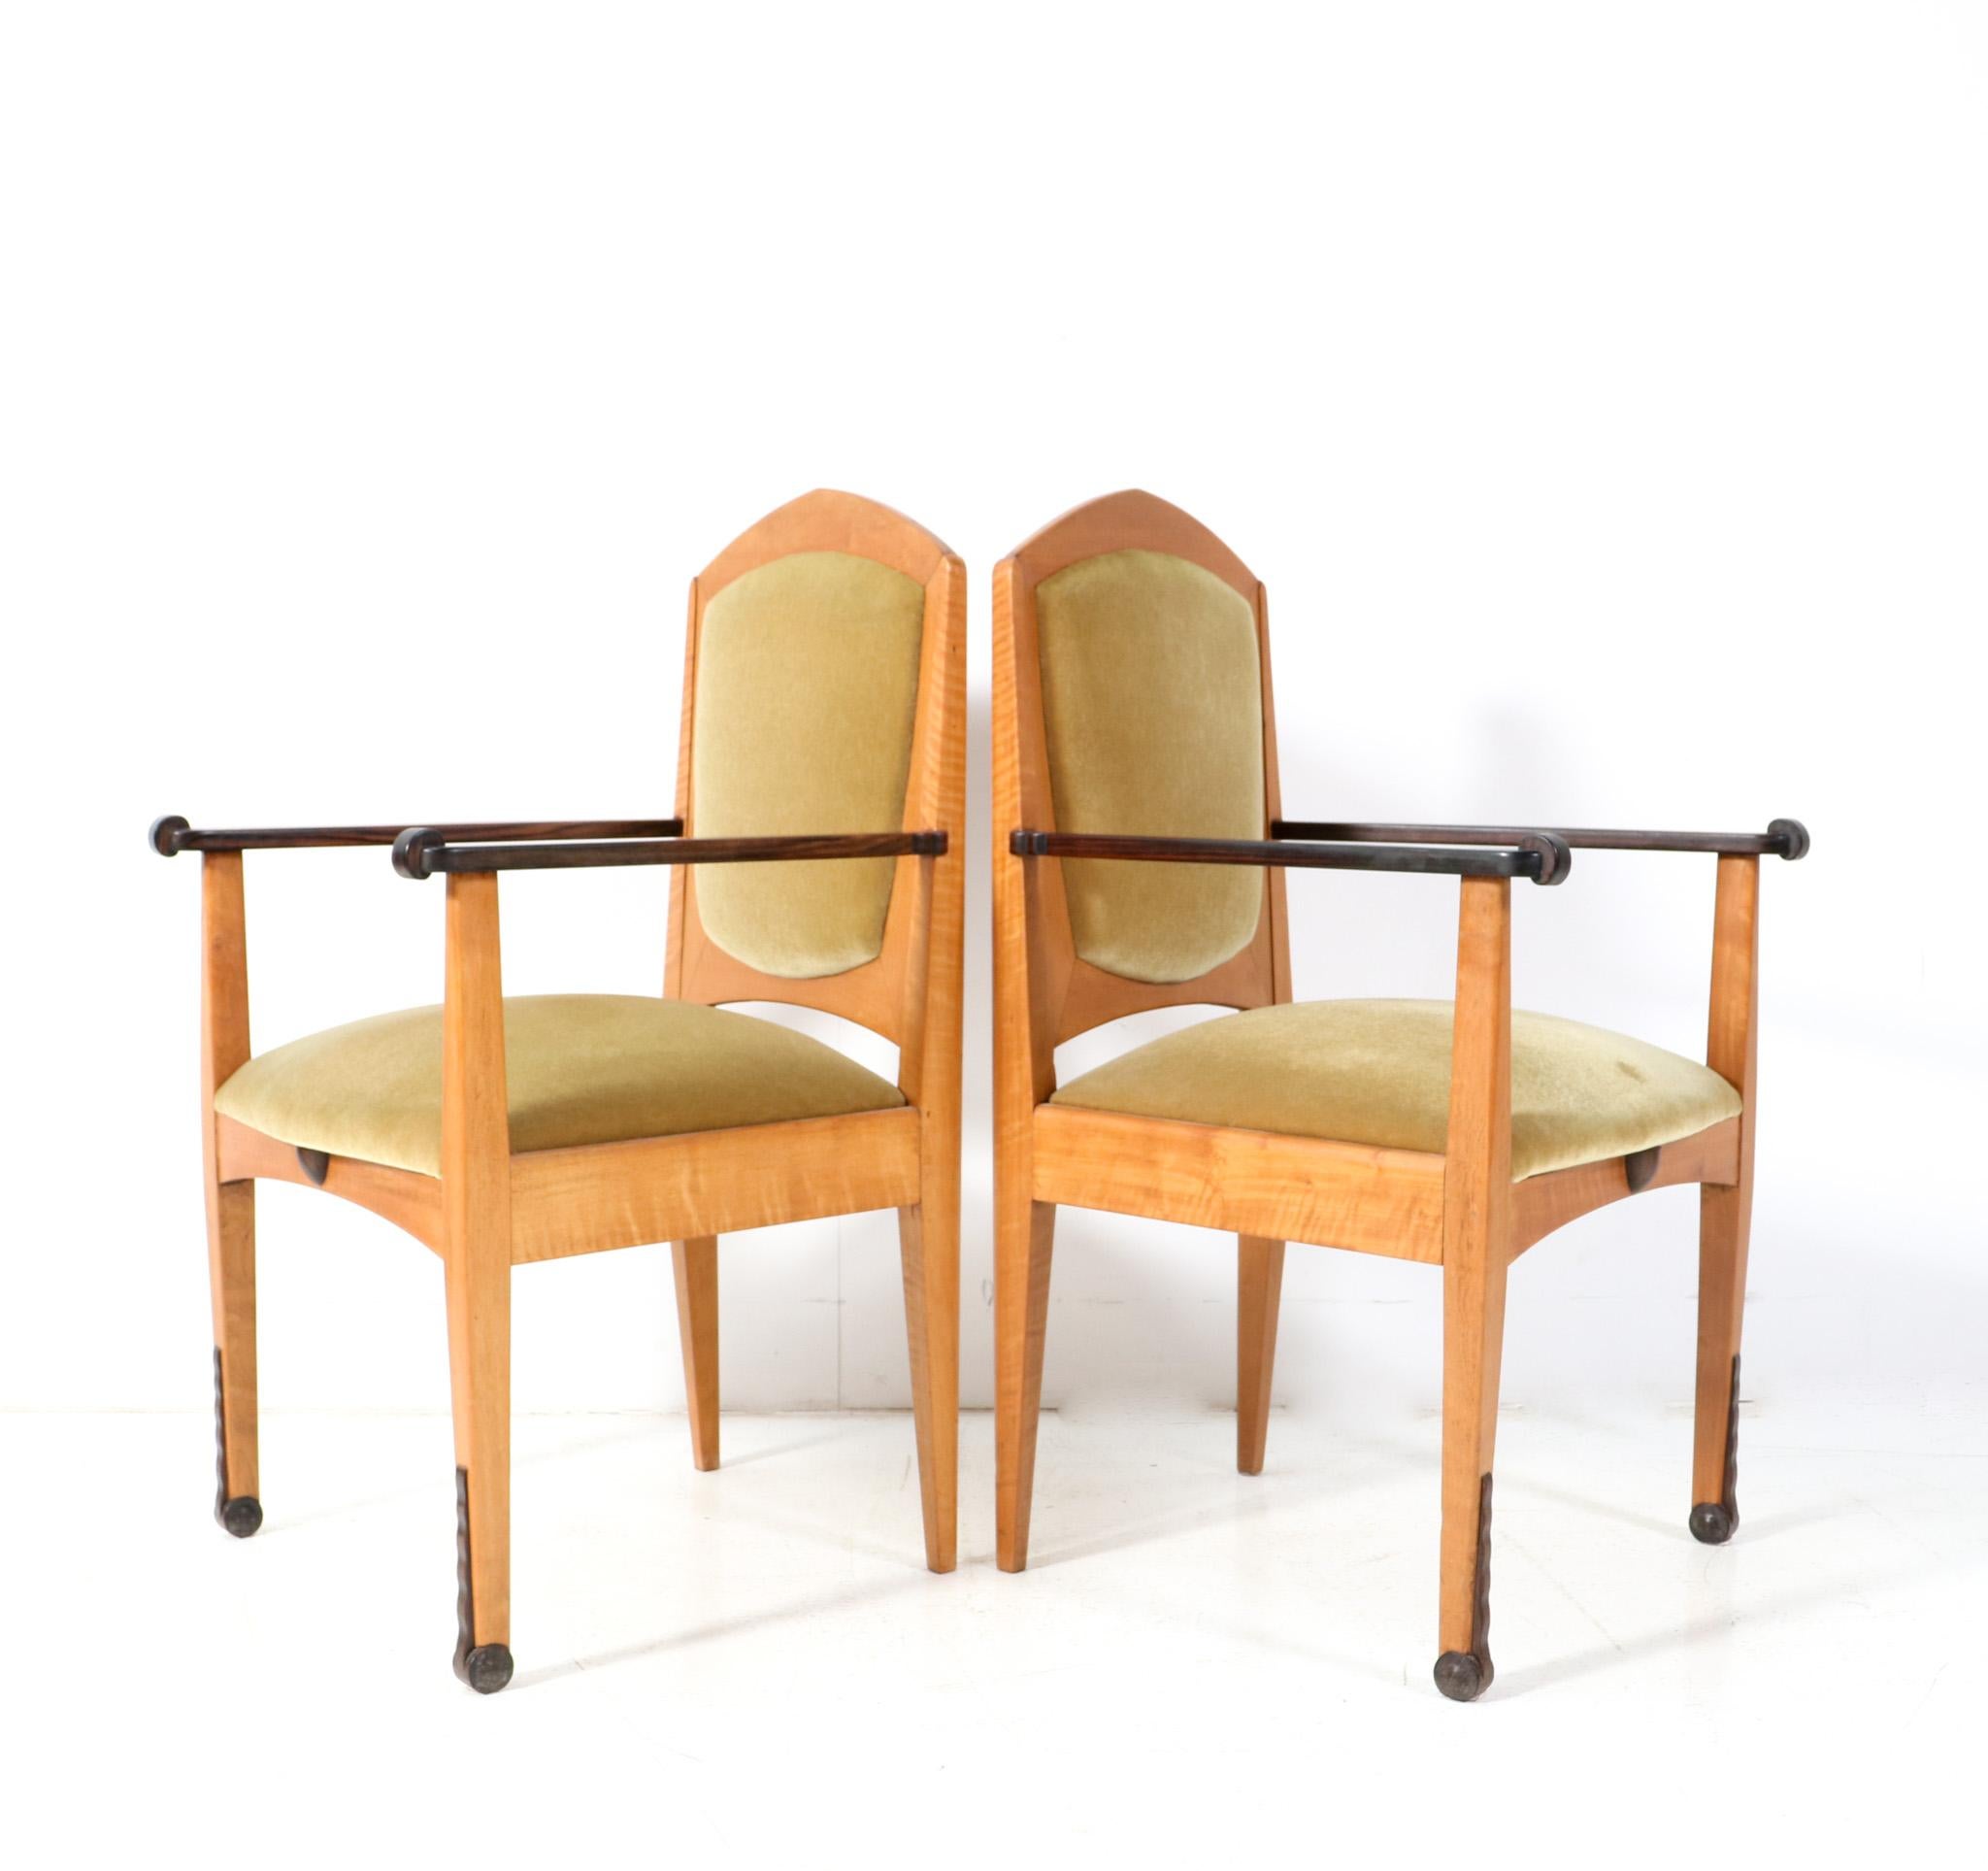 Fabric Set of Six Art Deco Amsterdamse School Dining Room Chairs by J.J. Zijfers, 1920s For Sale